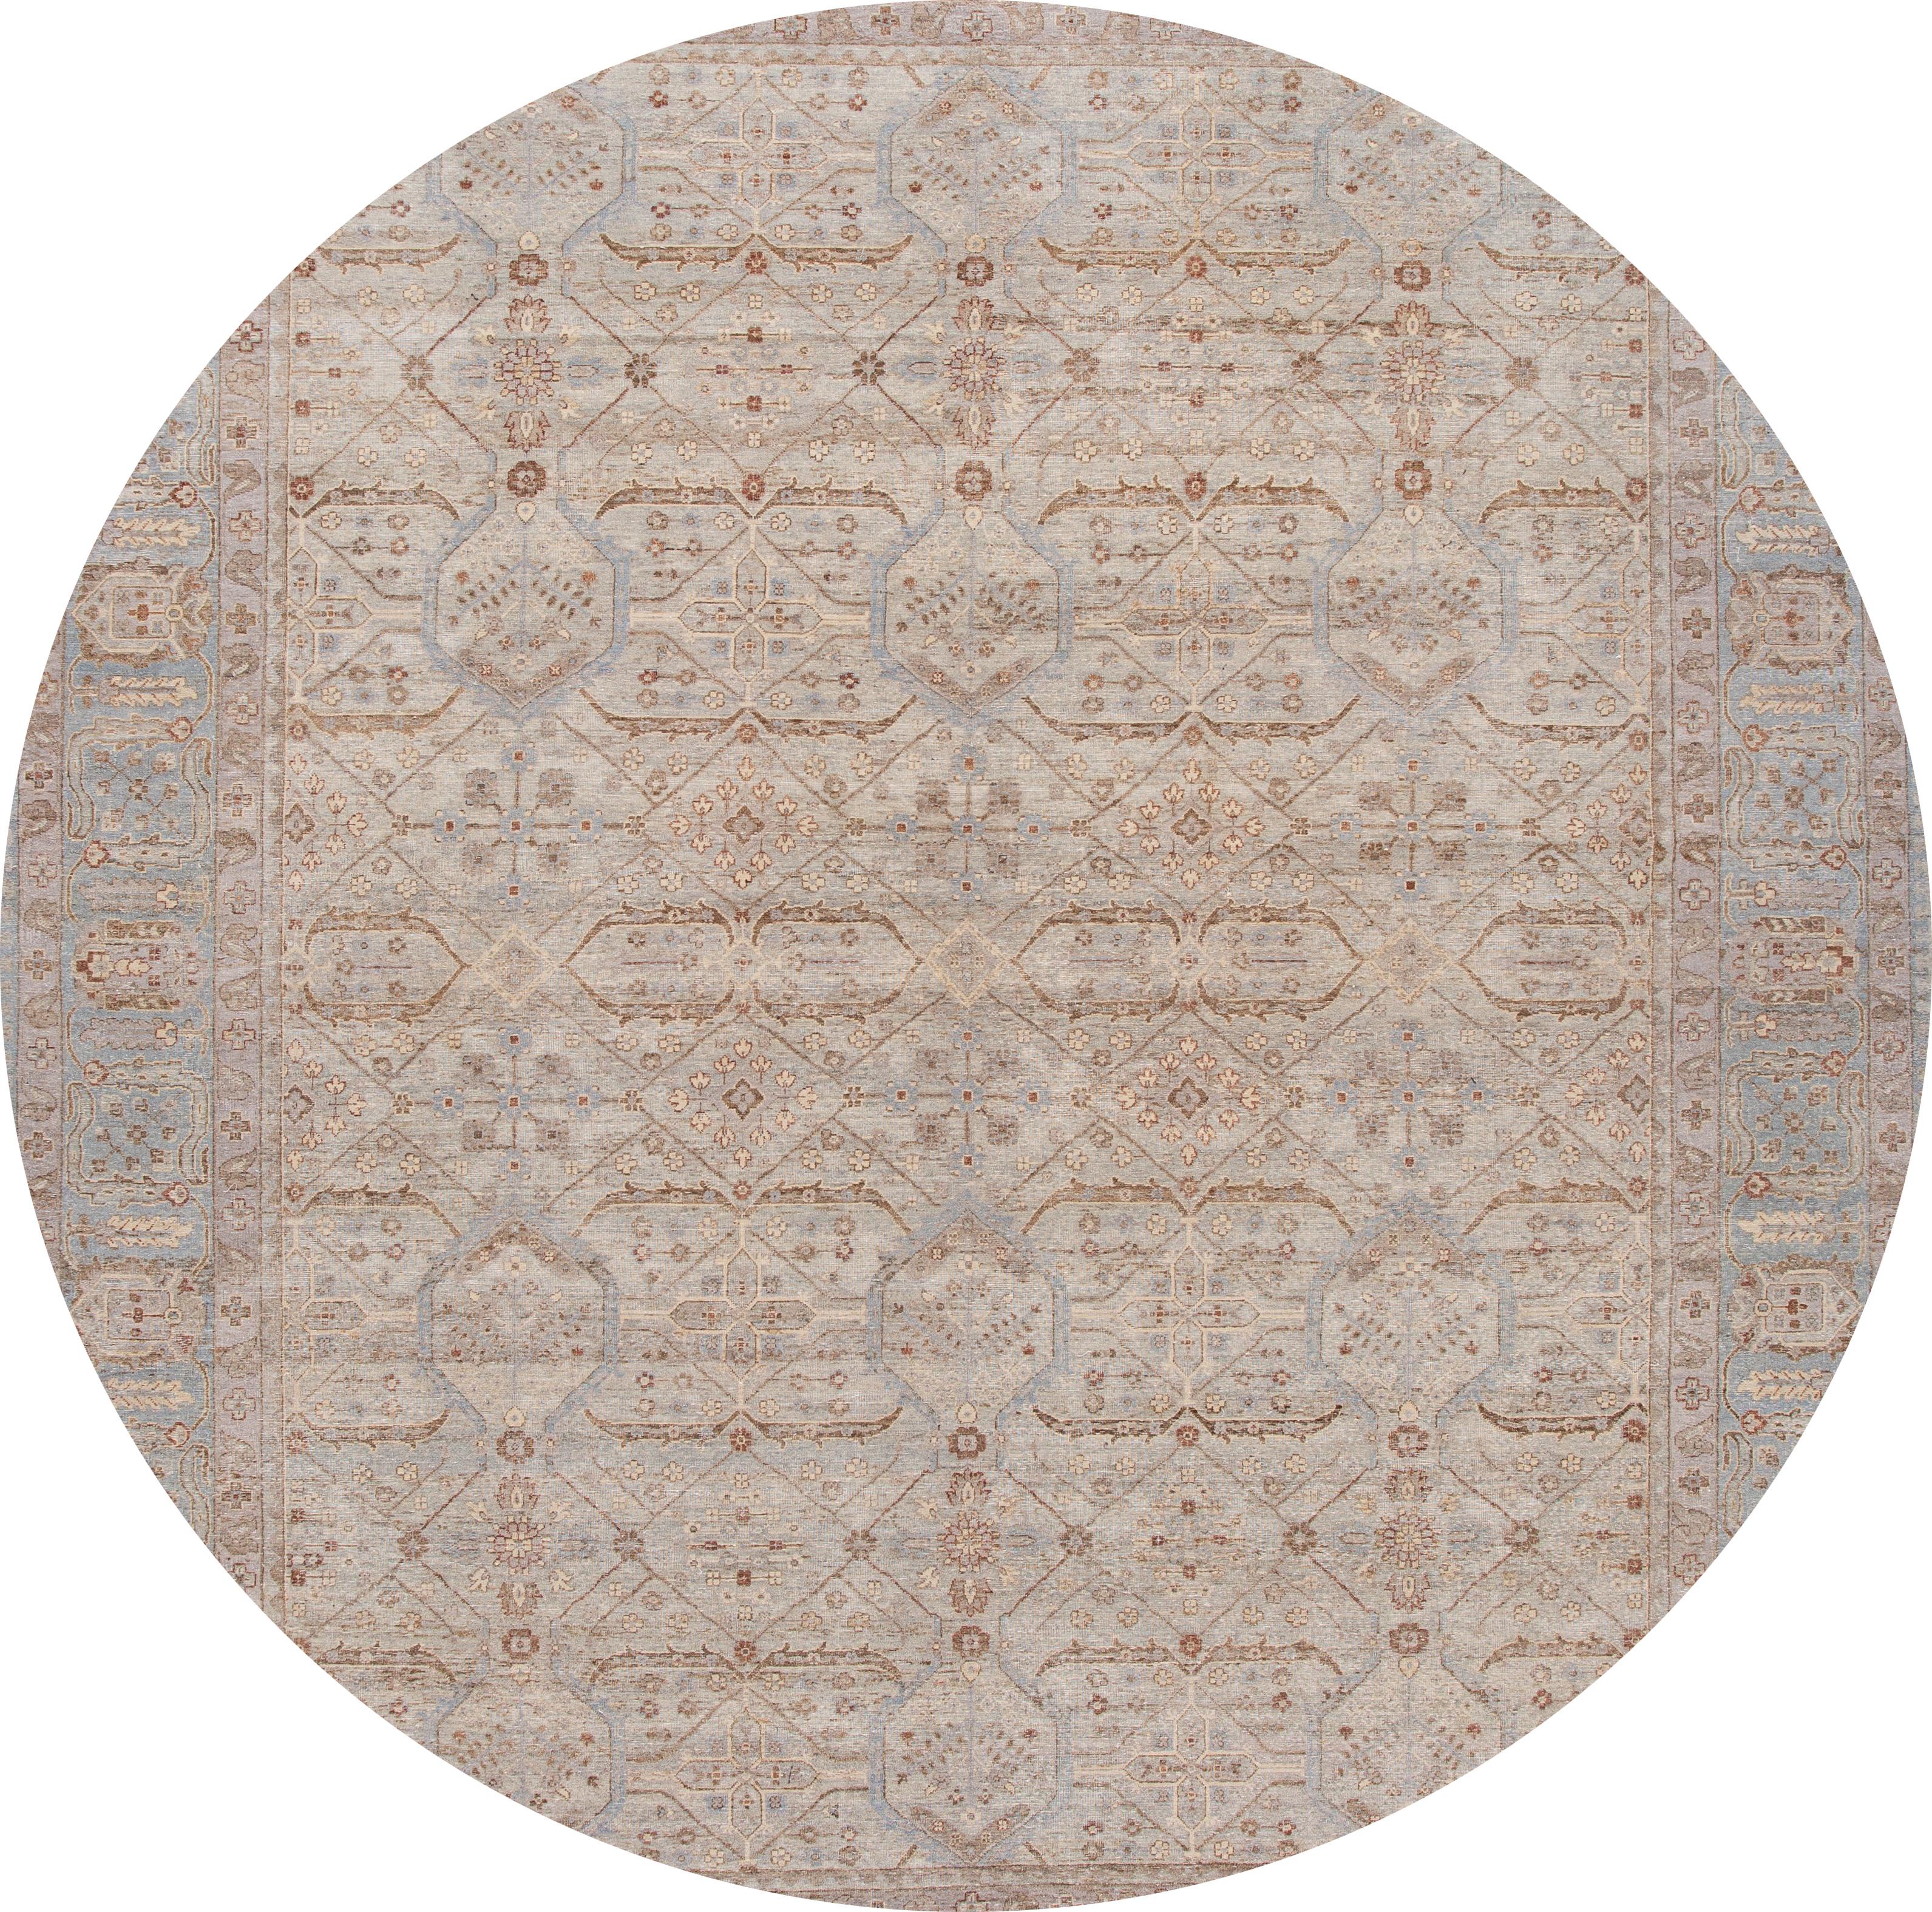 A contemporary Tabriz style rug with a tan field and ivory and blue accents in a symmetrical, interconnected floral and vine design. This hand knotted wool.
This rug measures: 12'1